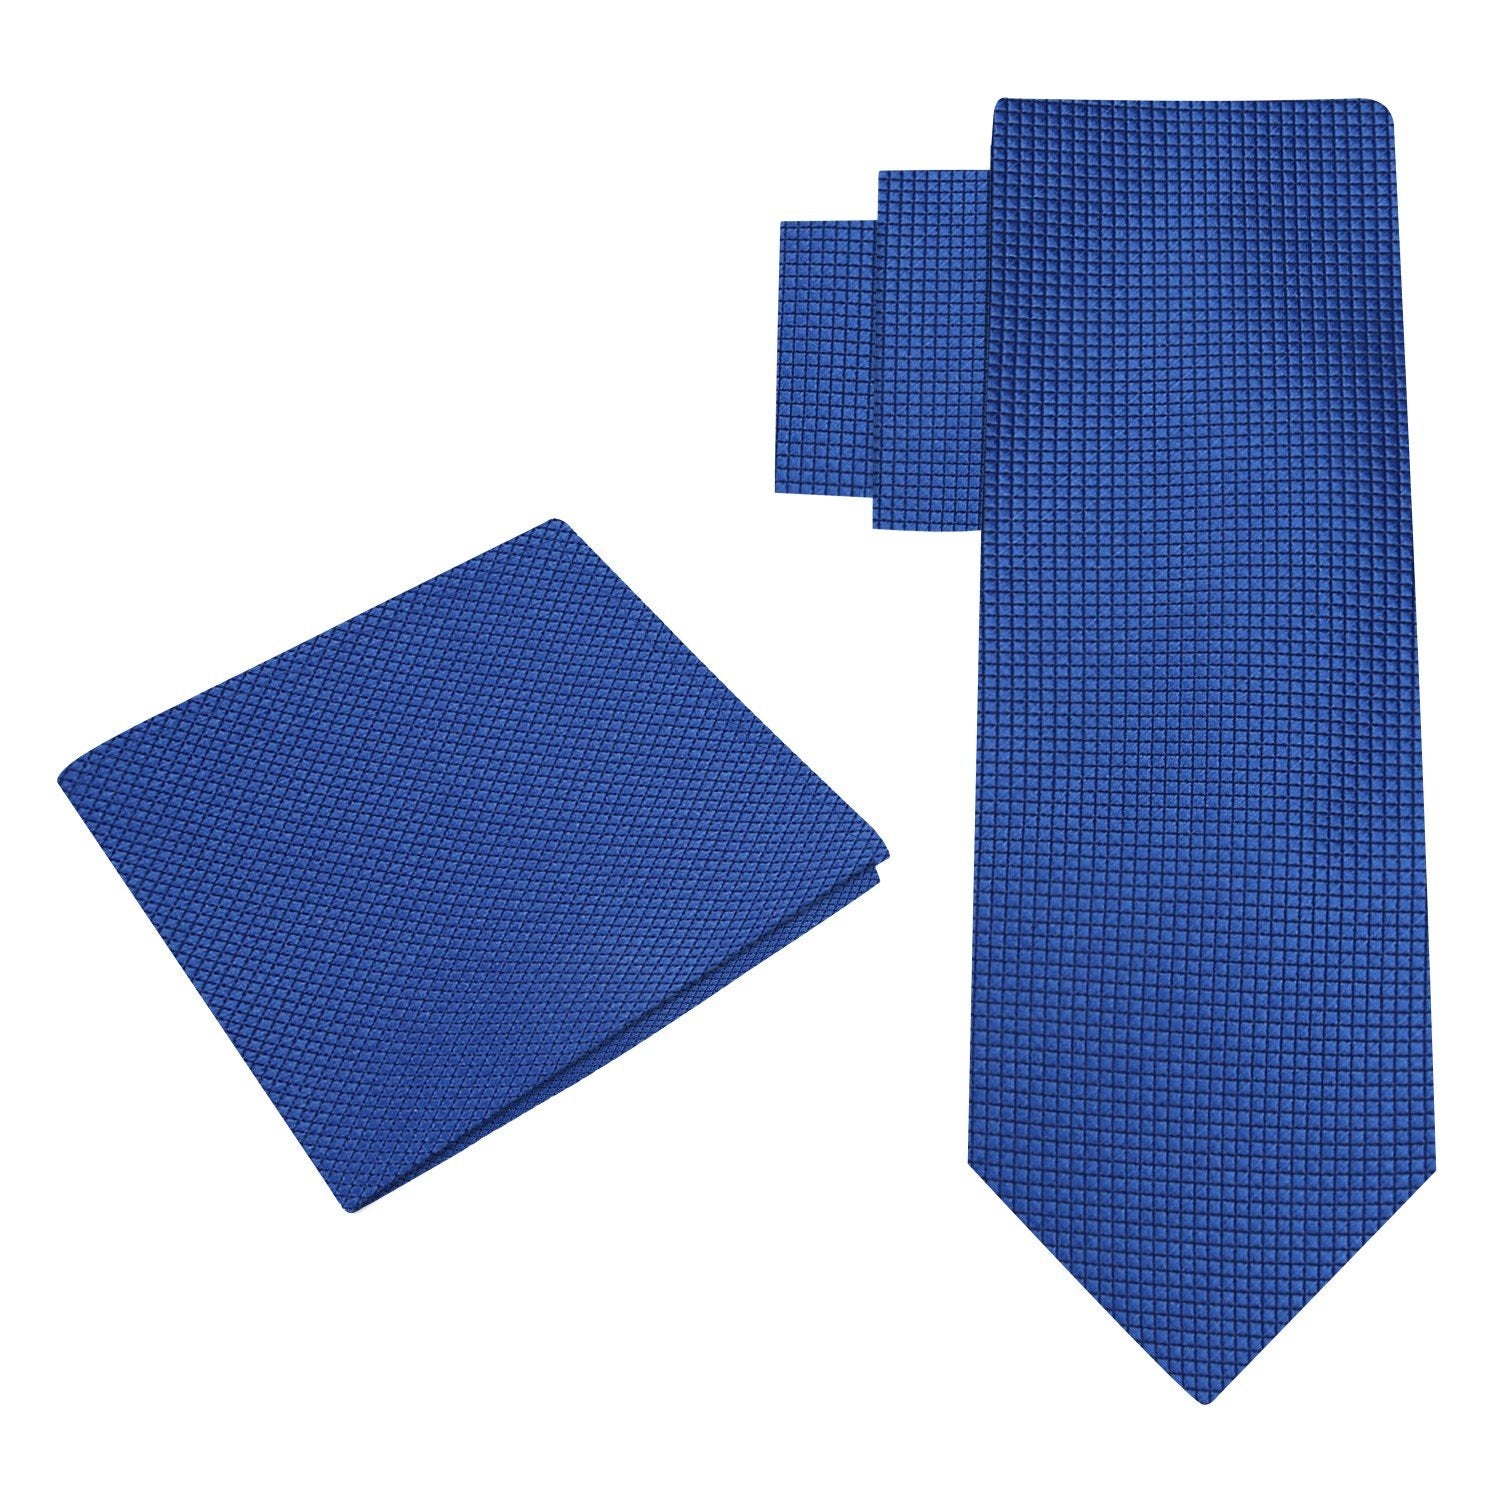 Alt View: A Solid Deep Blue With Check Texture Pattern Silk Necktie, Matching Pocket Square